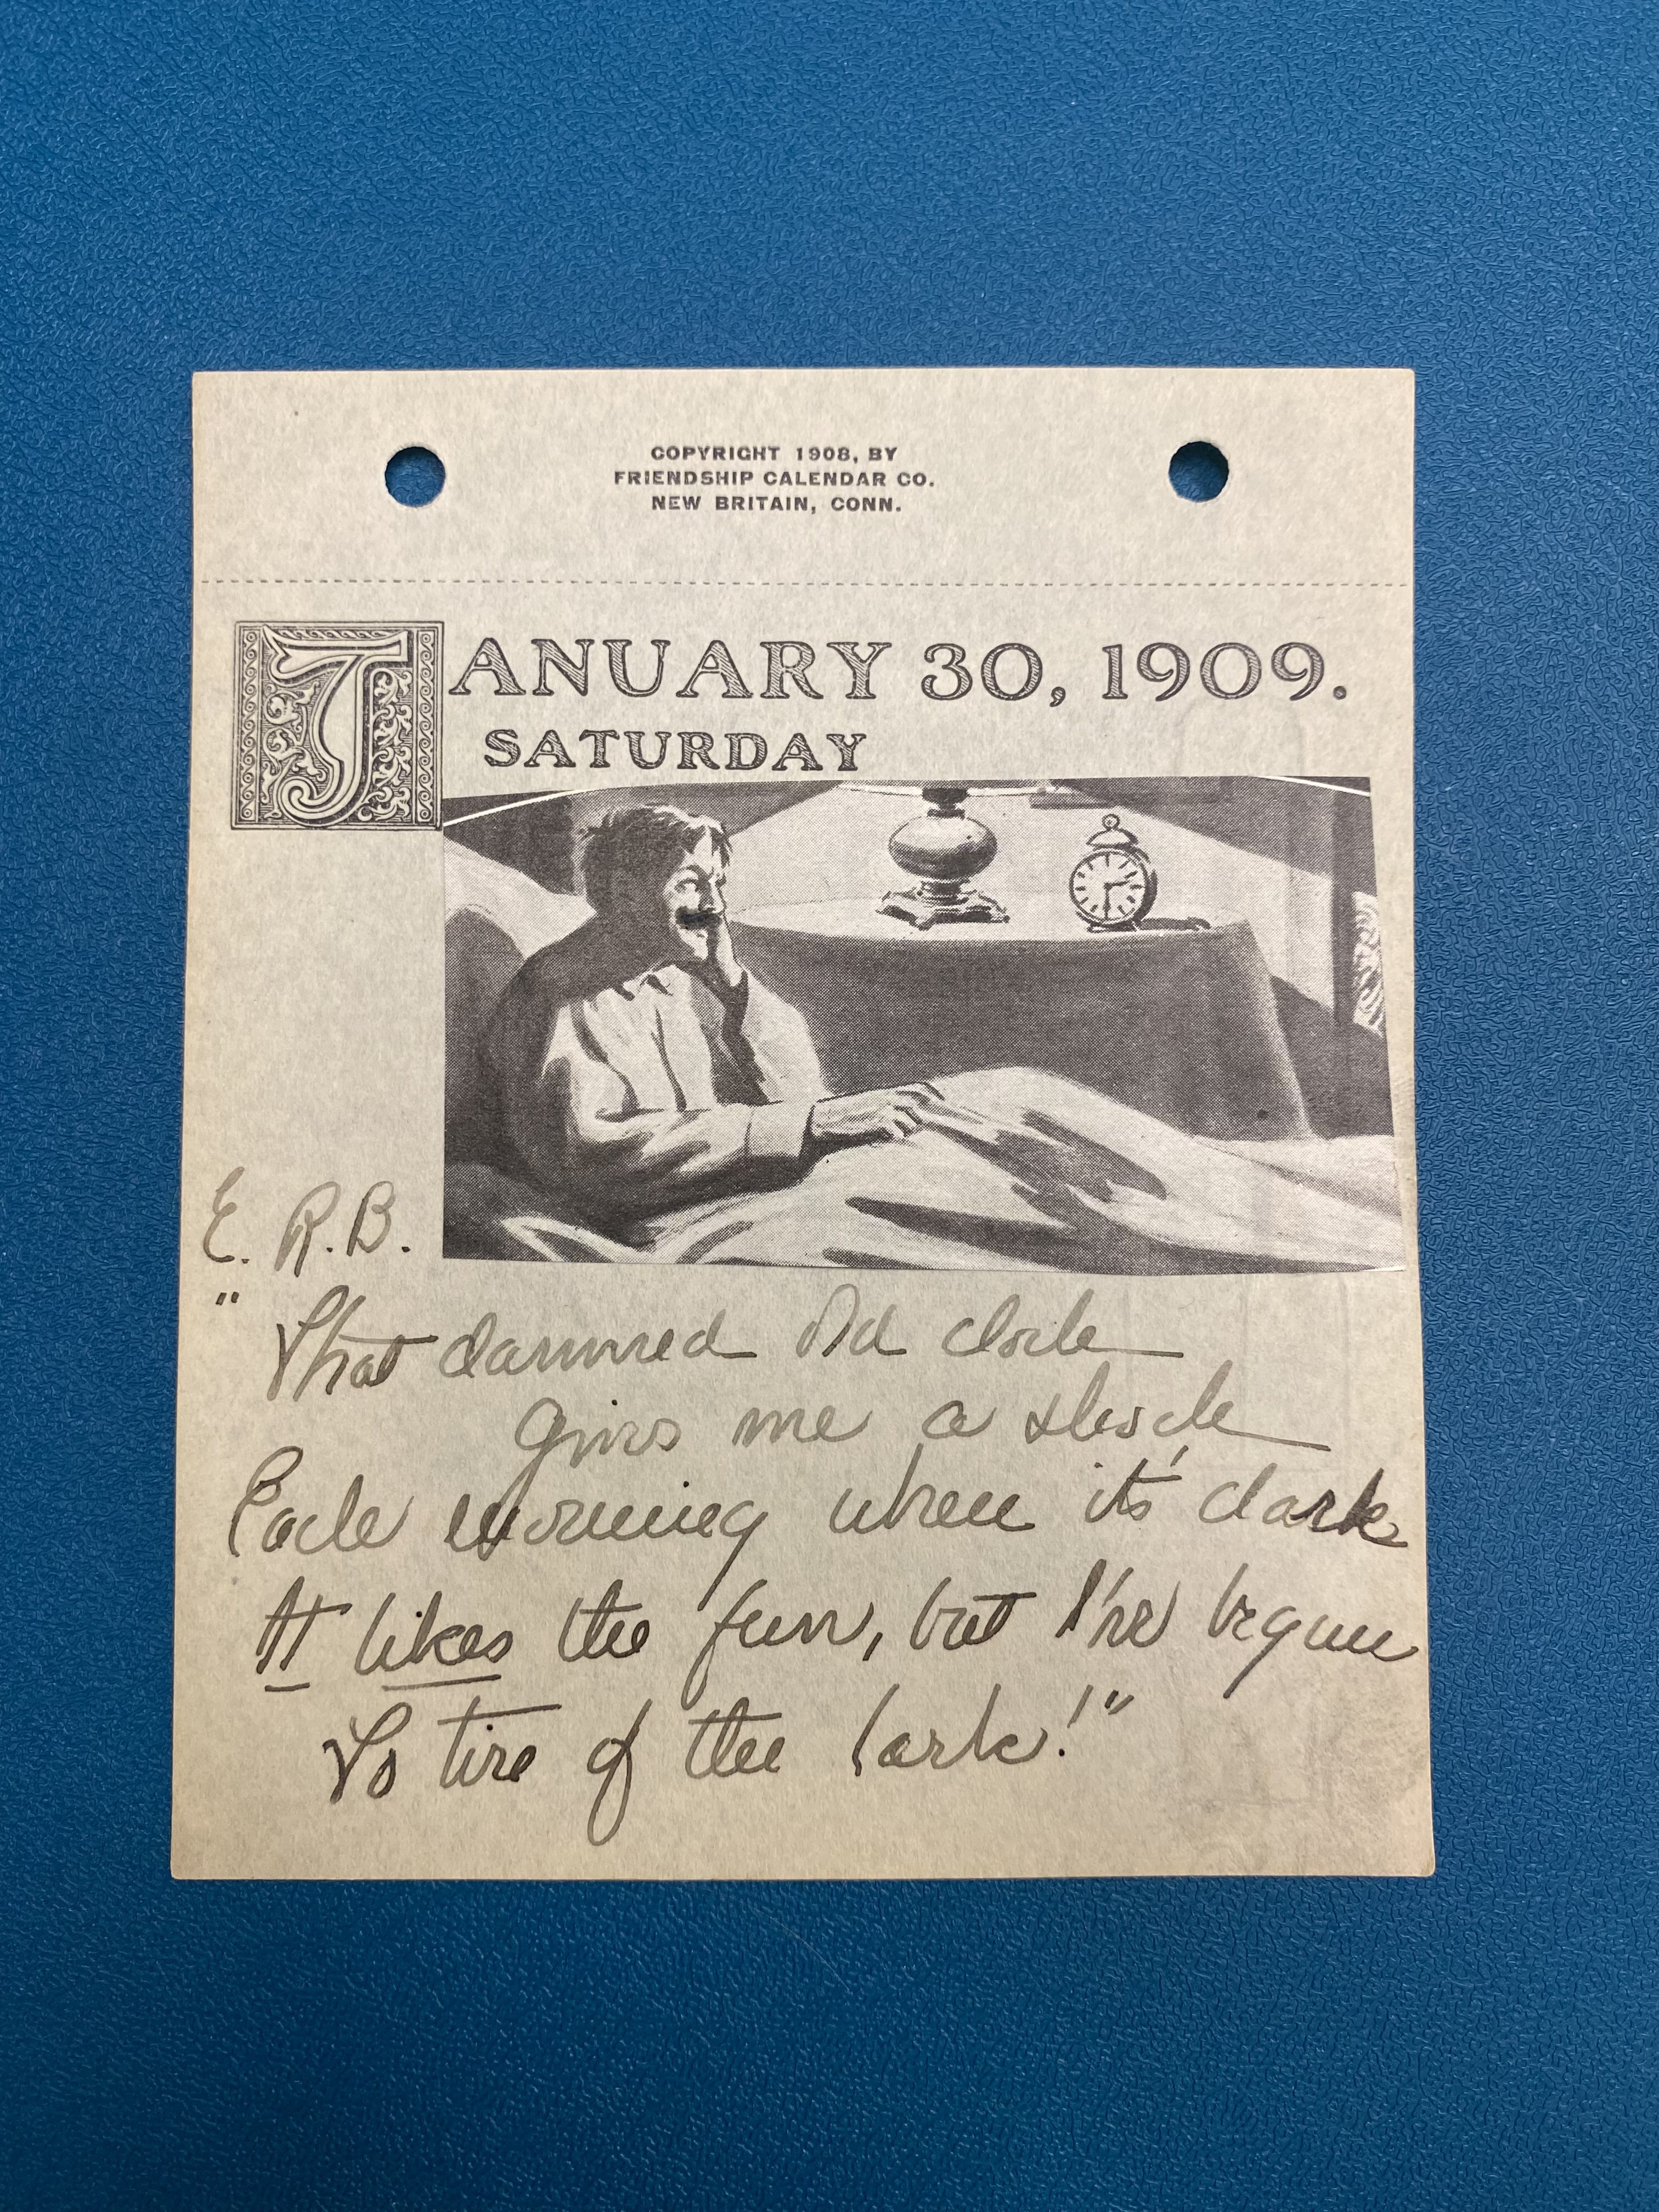  January 30, 1909. Saturday: A man with a mustache lying in bed.